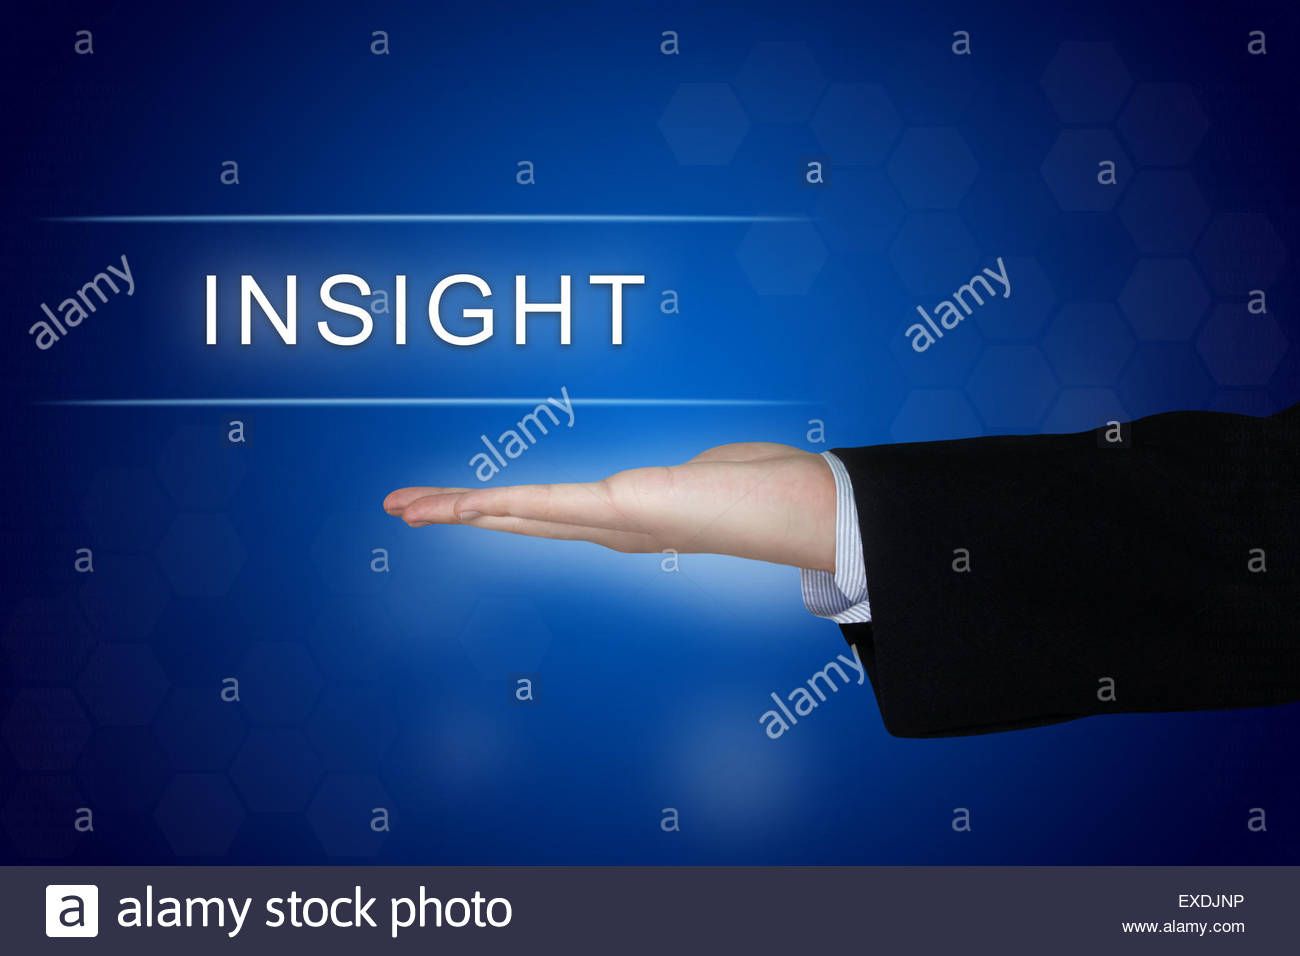 Insight Button With Business Hand On Blue Background Stock Photo